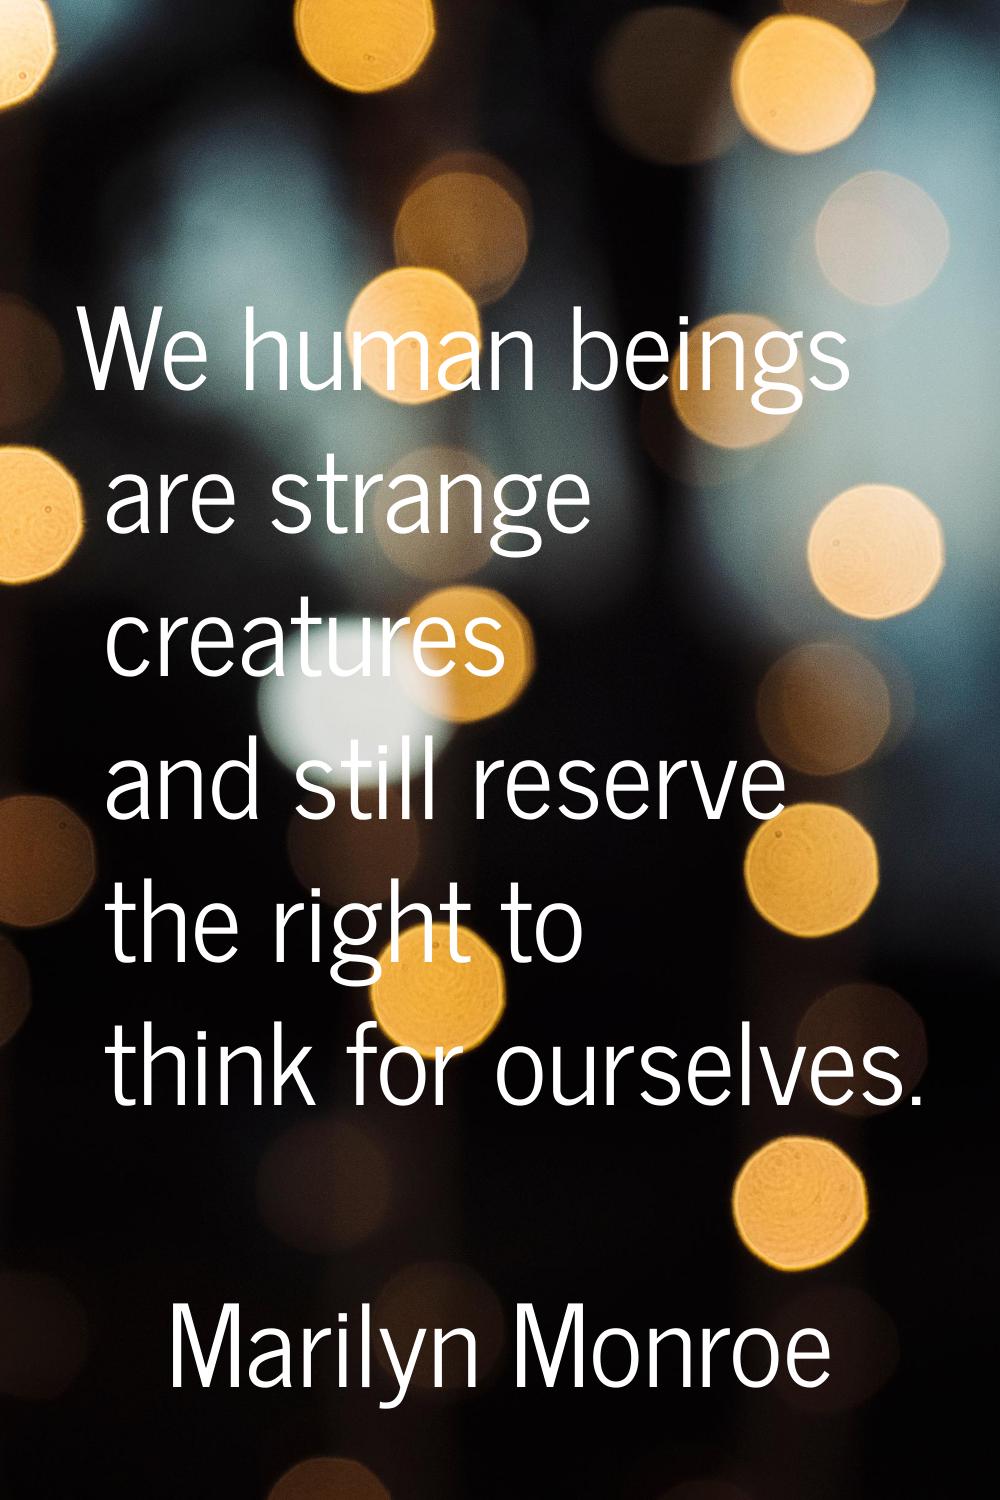 We human beings are strange creatures and still reserve the right to think for ourselves.